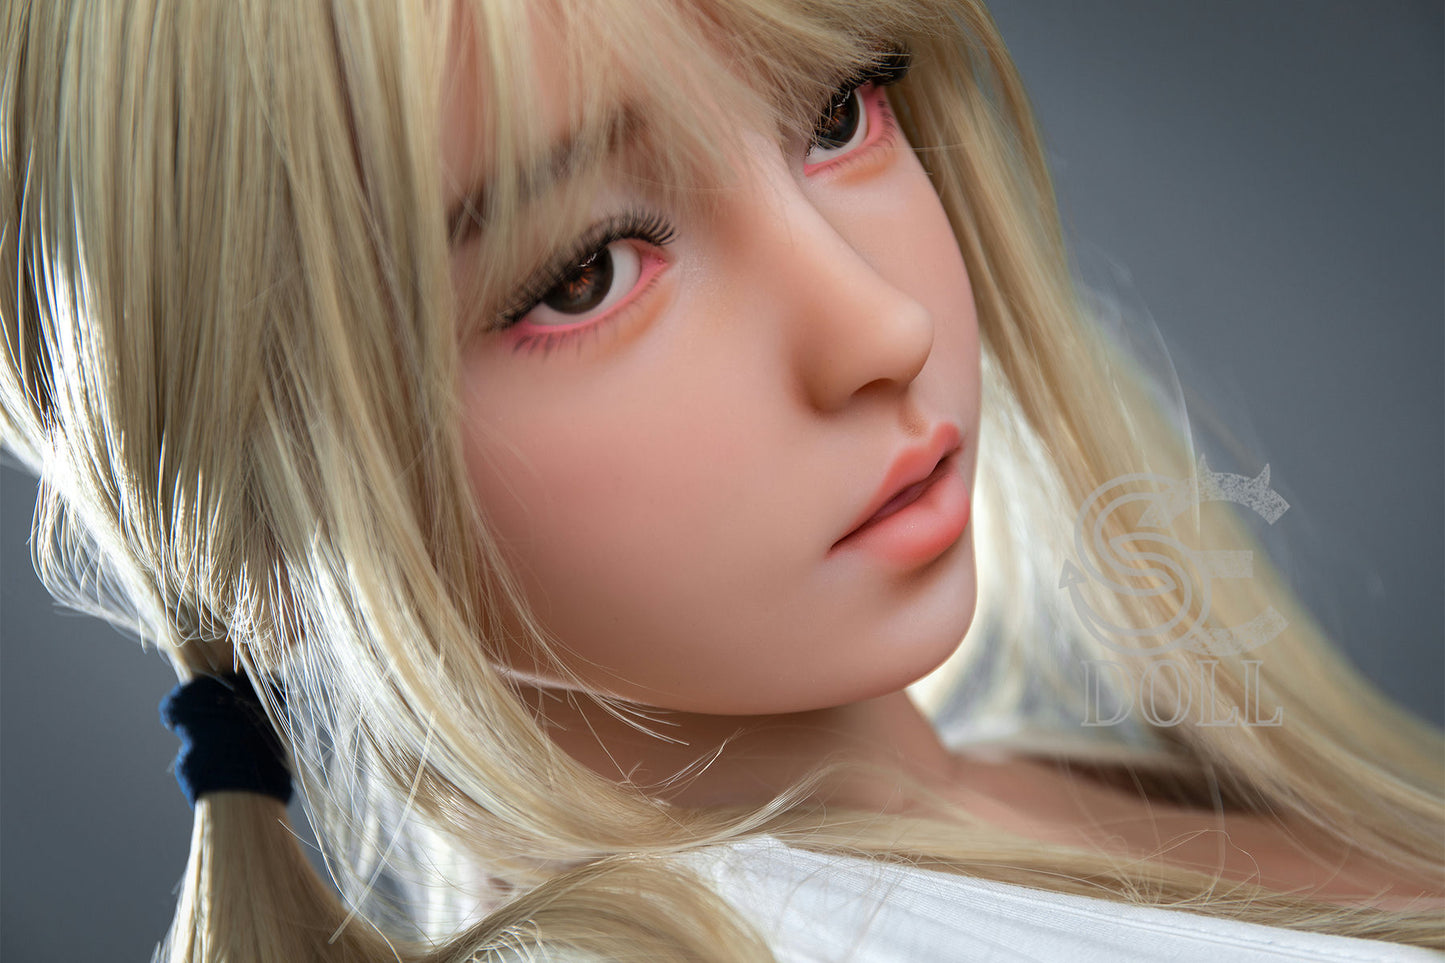 SE Doll 157cm H Cup - Melody